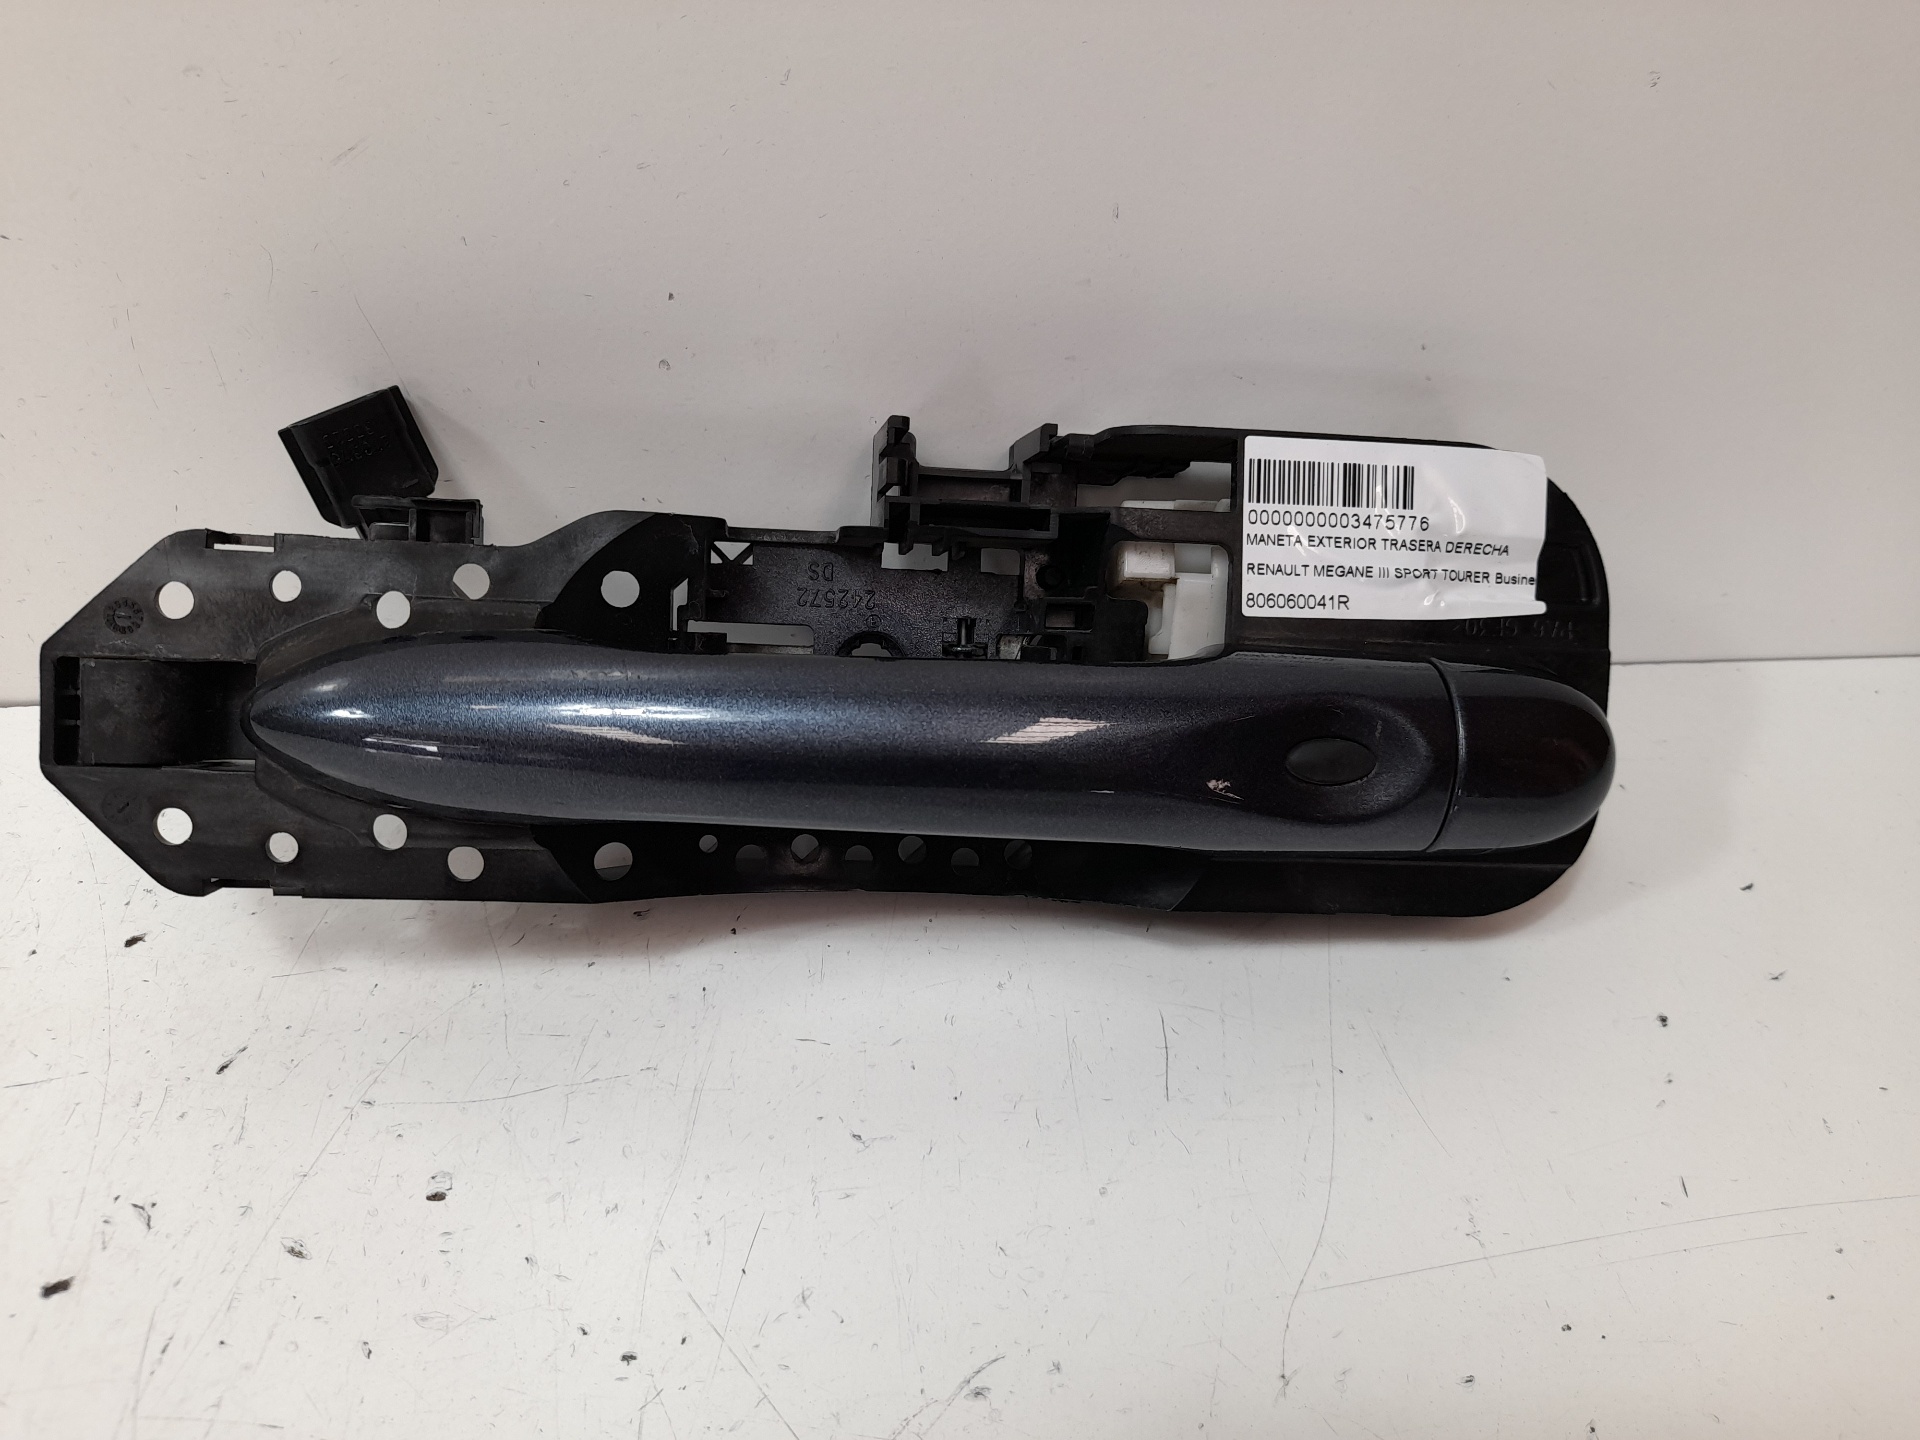 VAUXHALL Megane 3 generation (2008-2020) Rear right door outer handle 806060041R 25277324